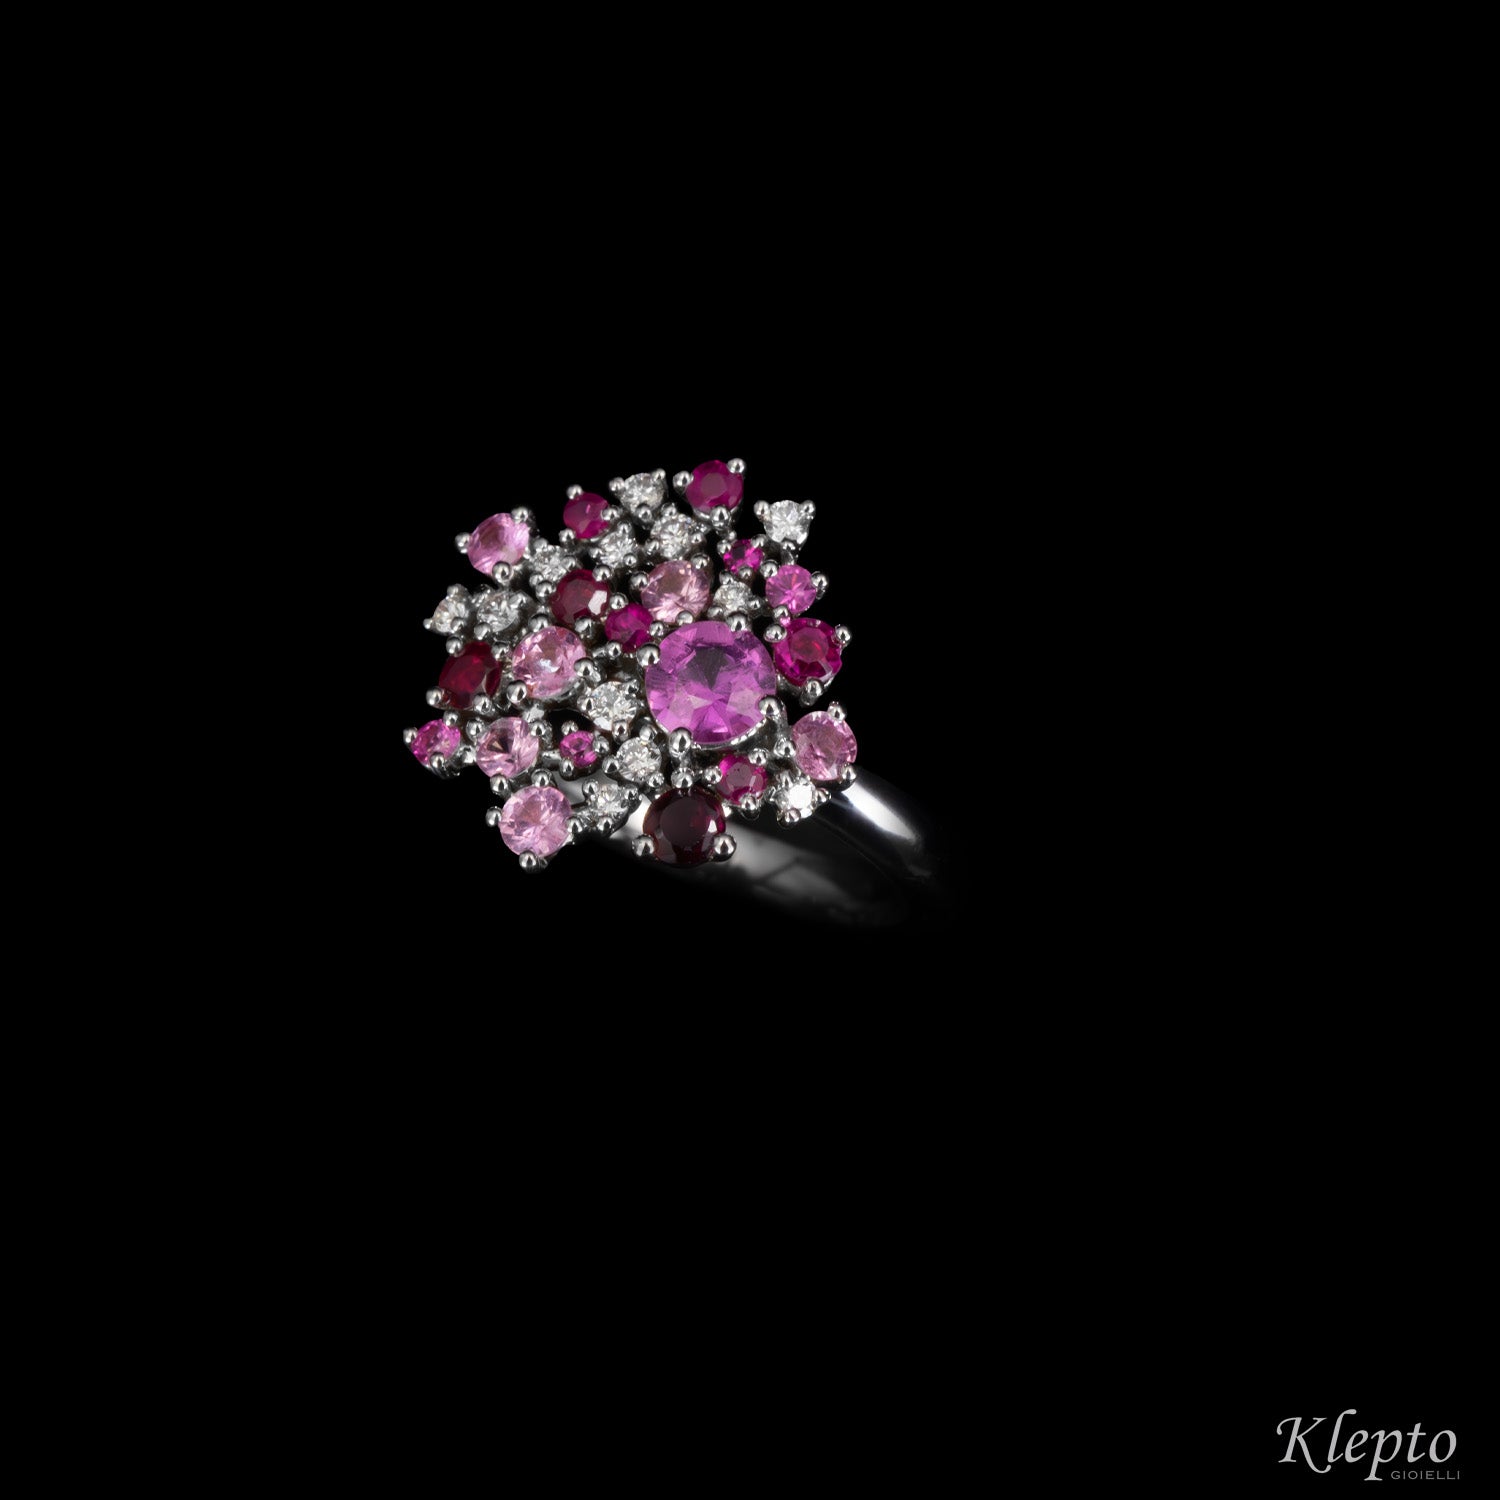 Classic ring in white gold with pink Sapphires, Rubies and Diamonds